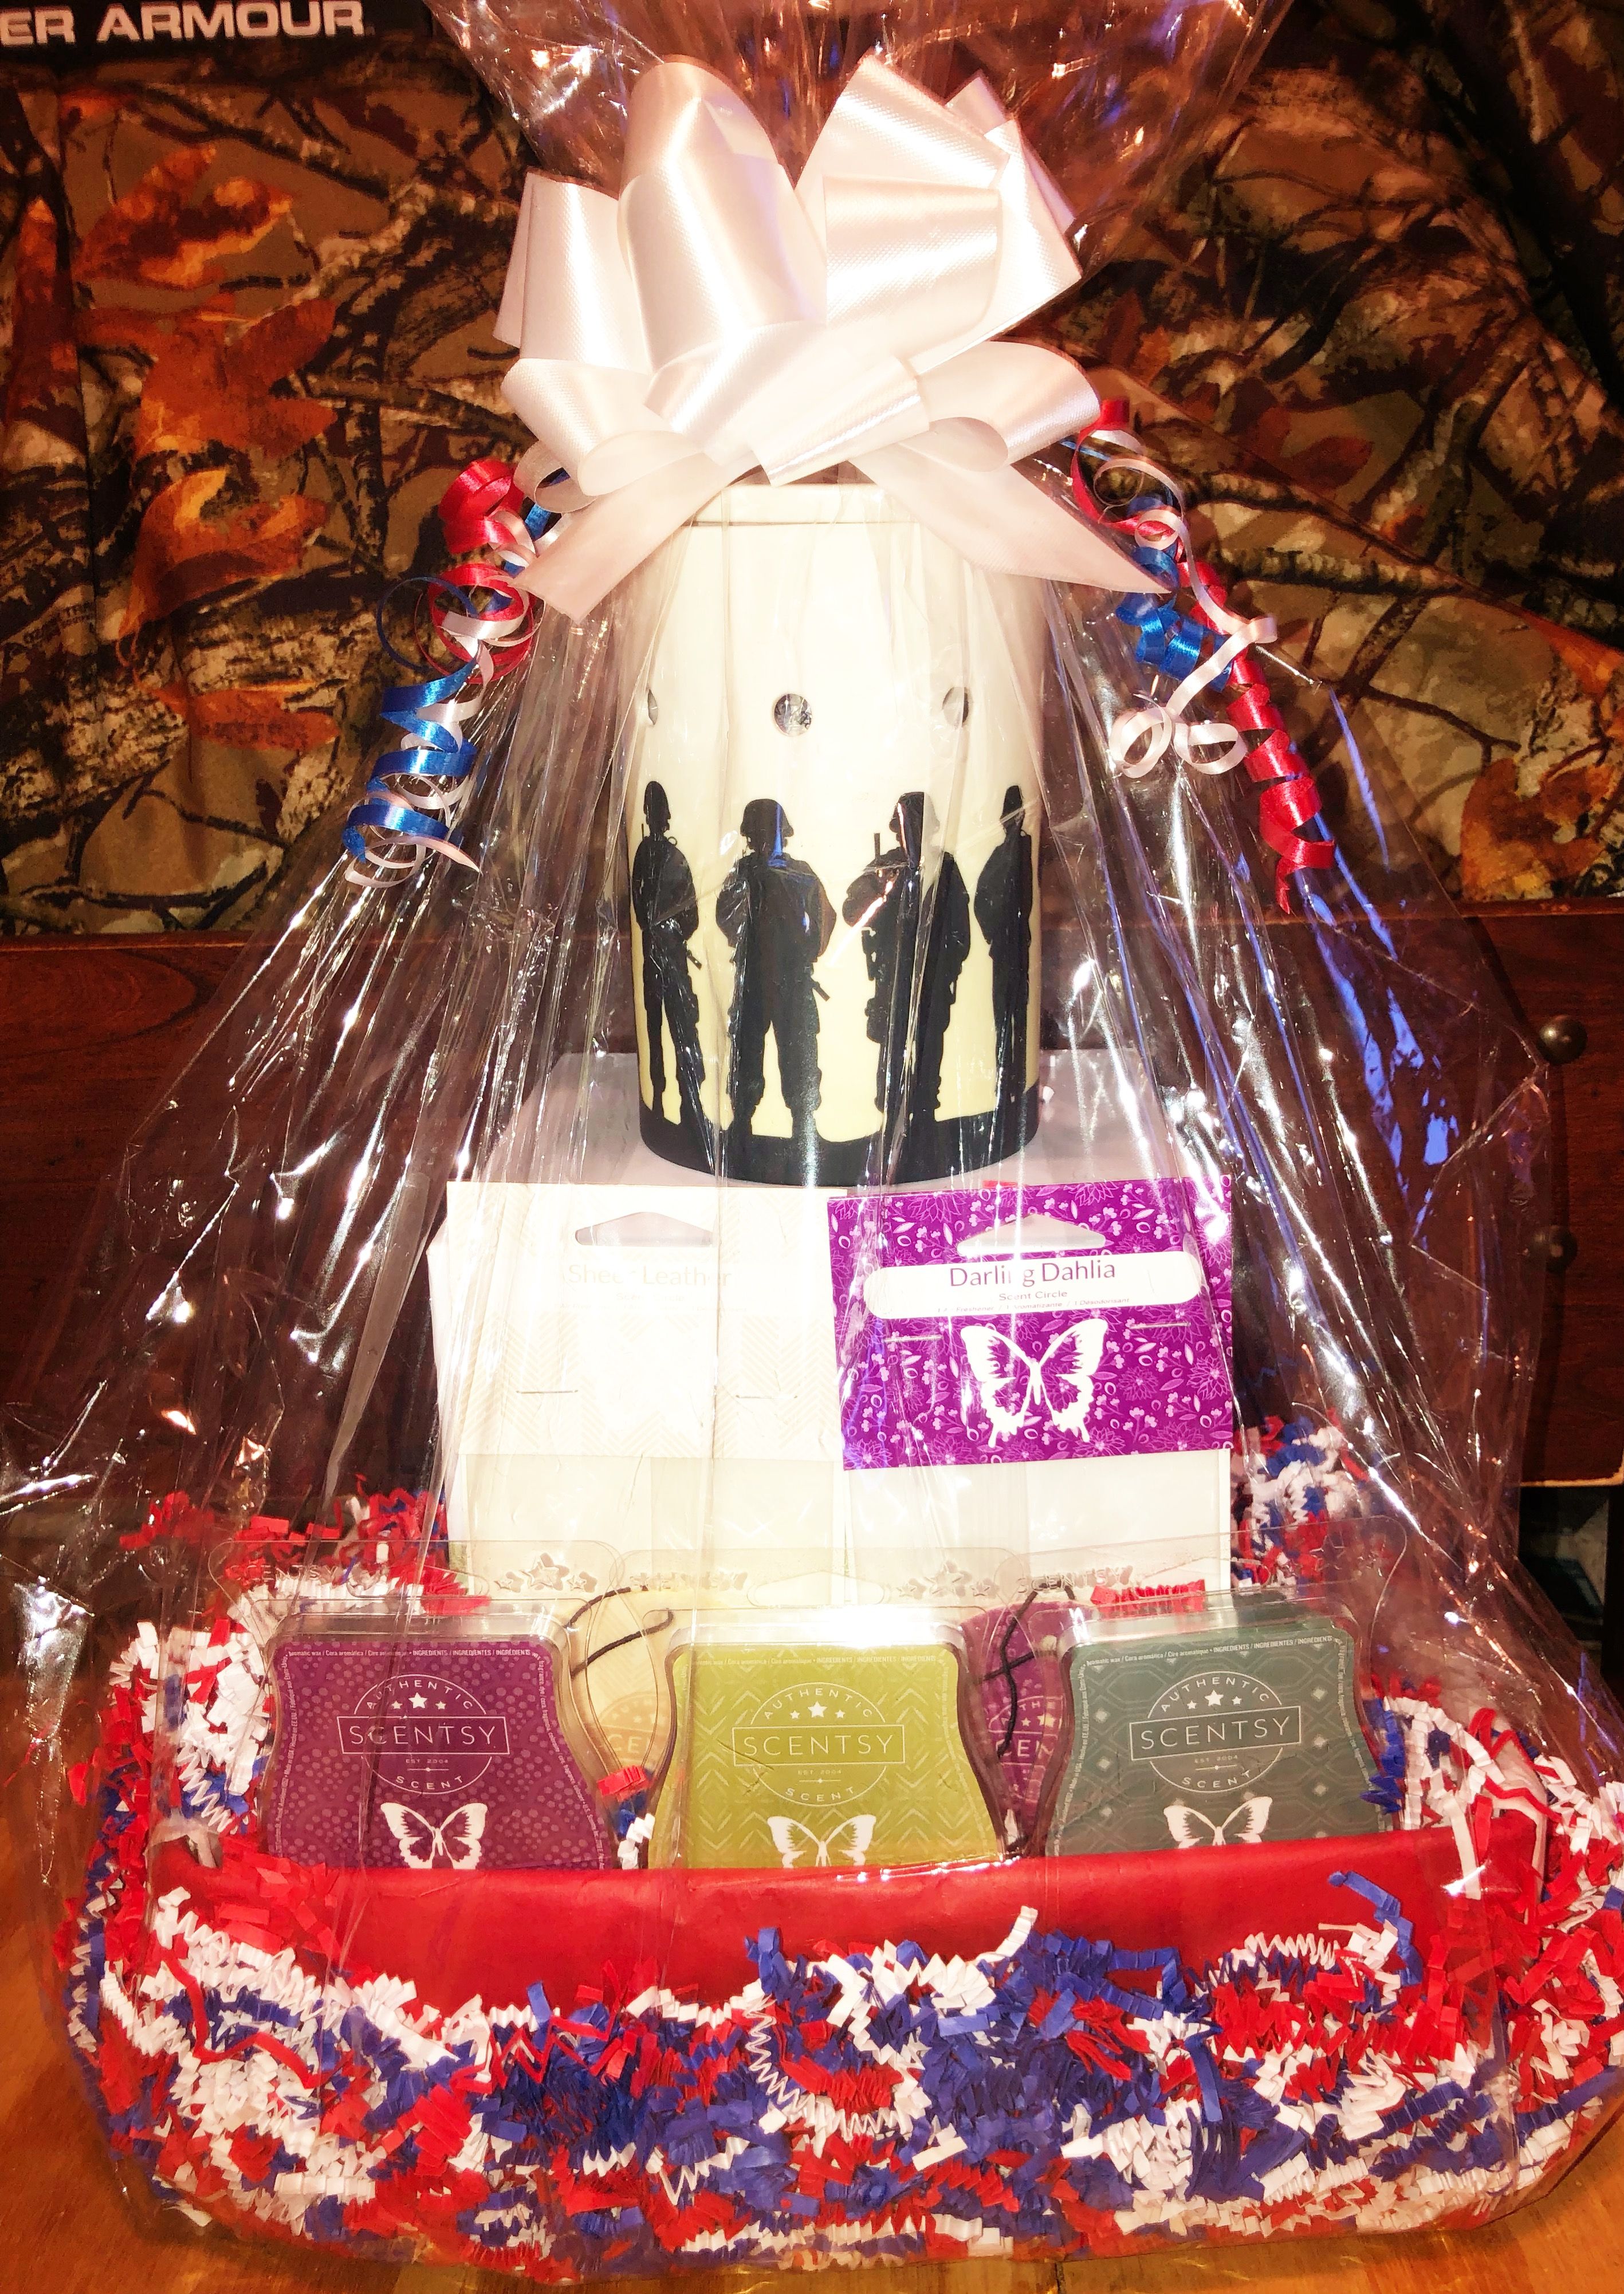 Scentsy gift basket | Scentsy, Raffle basket, Welcome home gifts